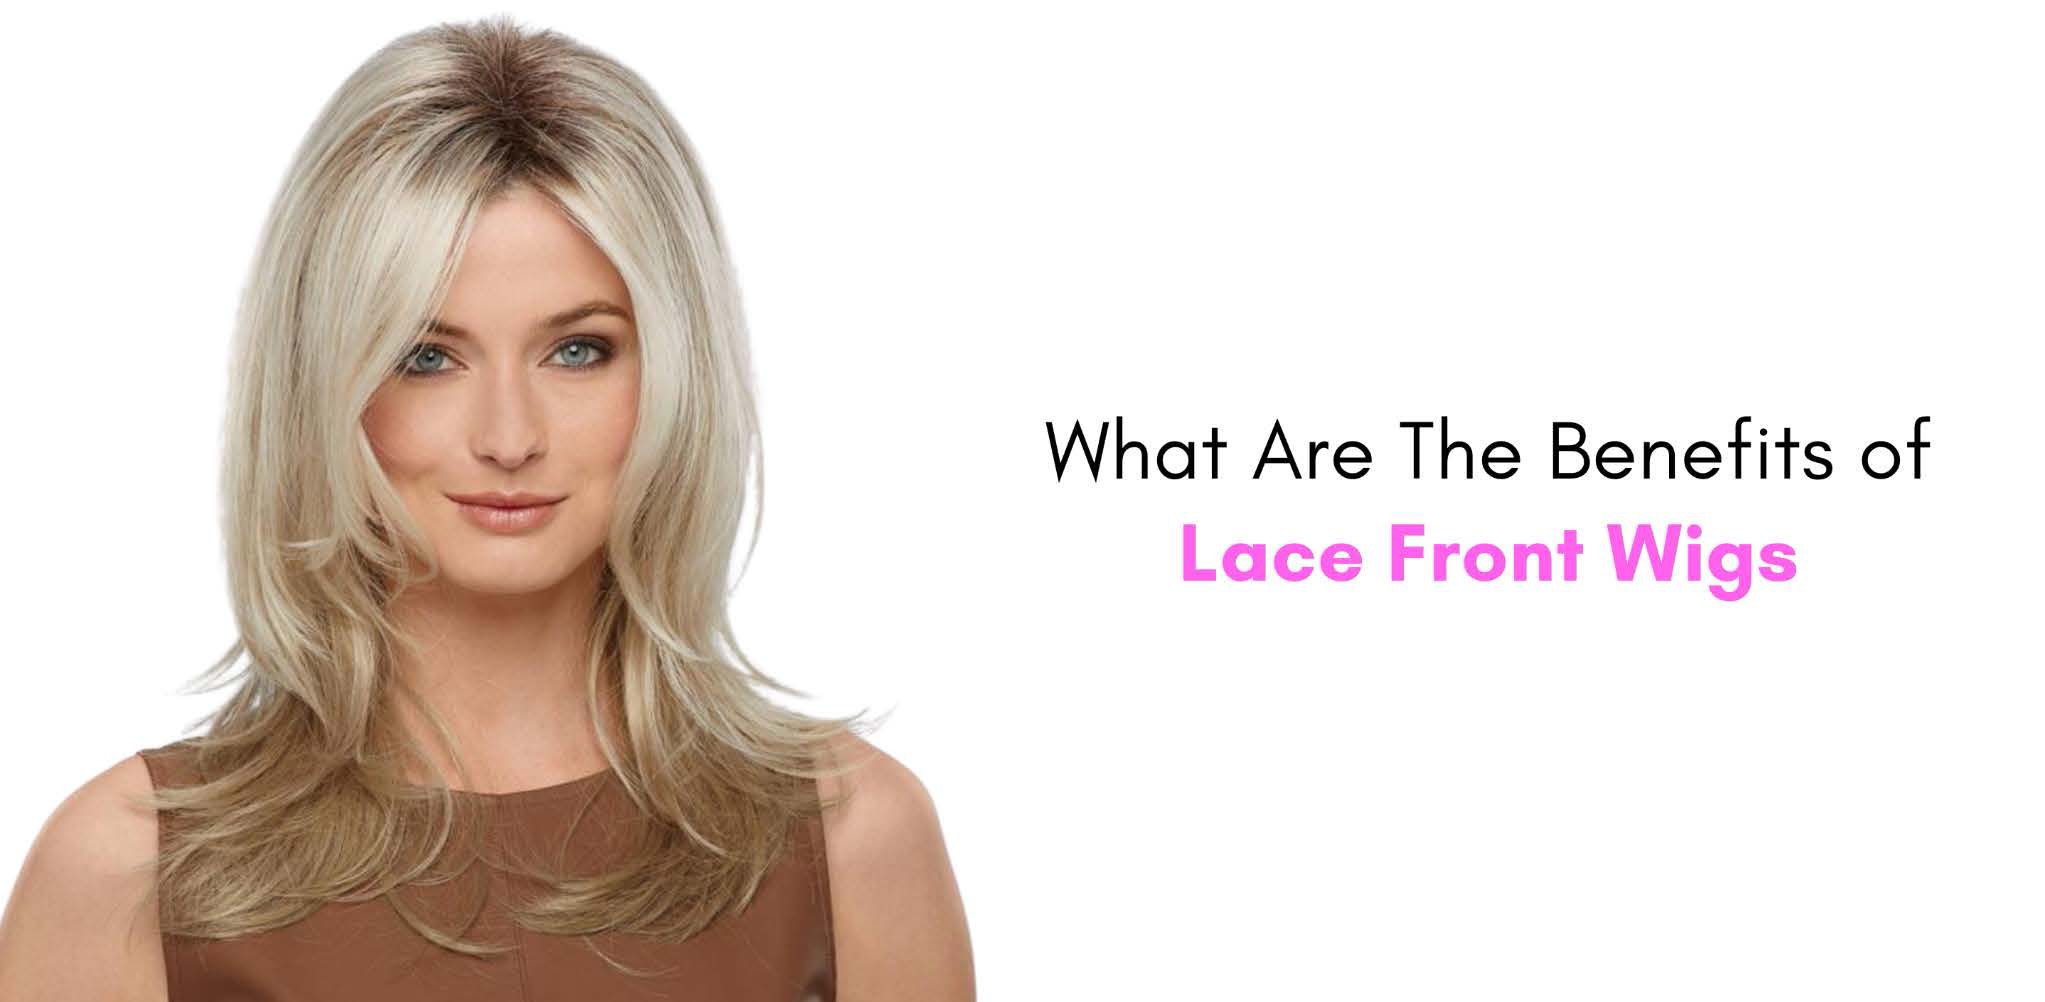 What Are The Benefits Of Lace Front Wigs?